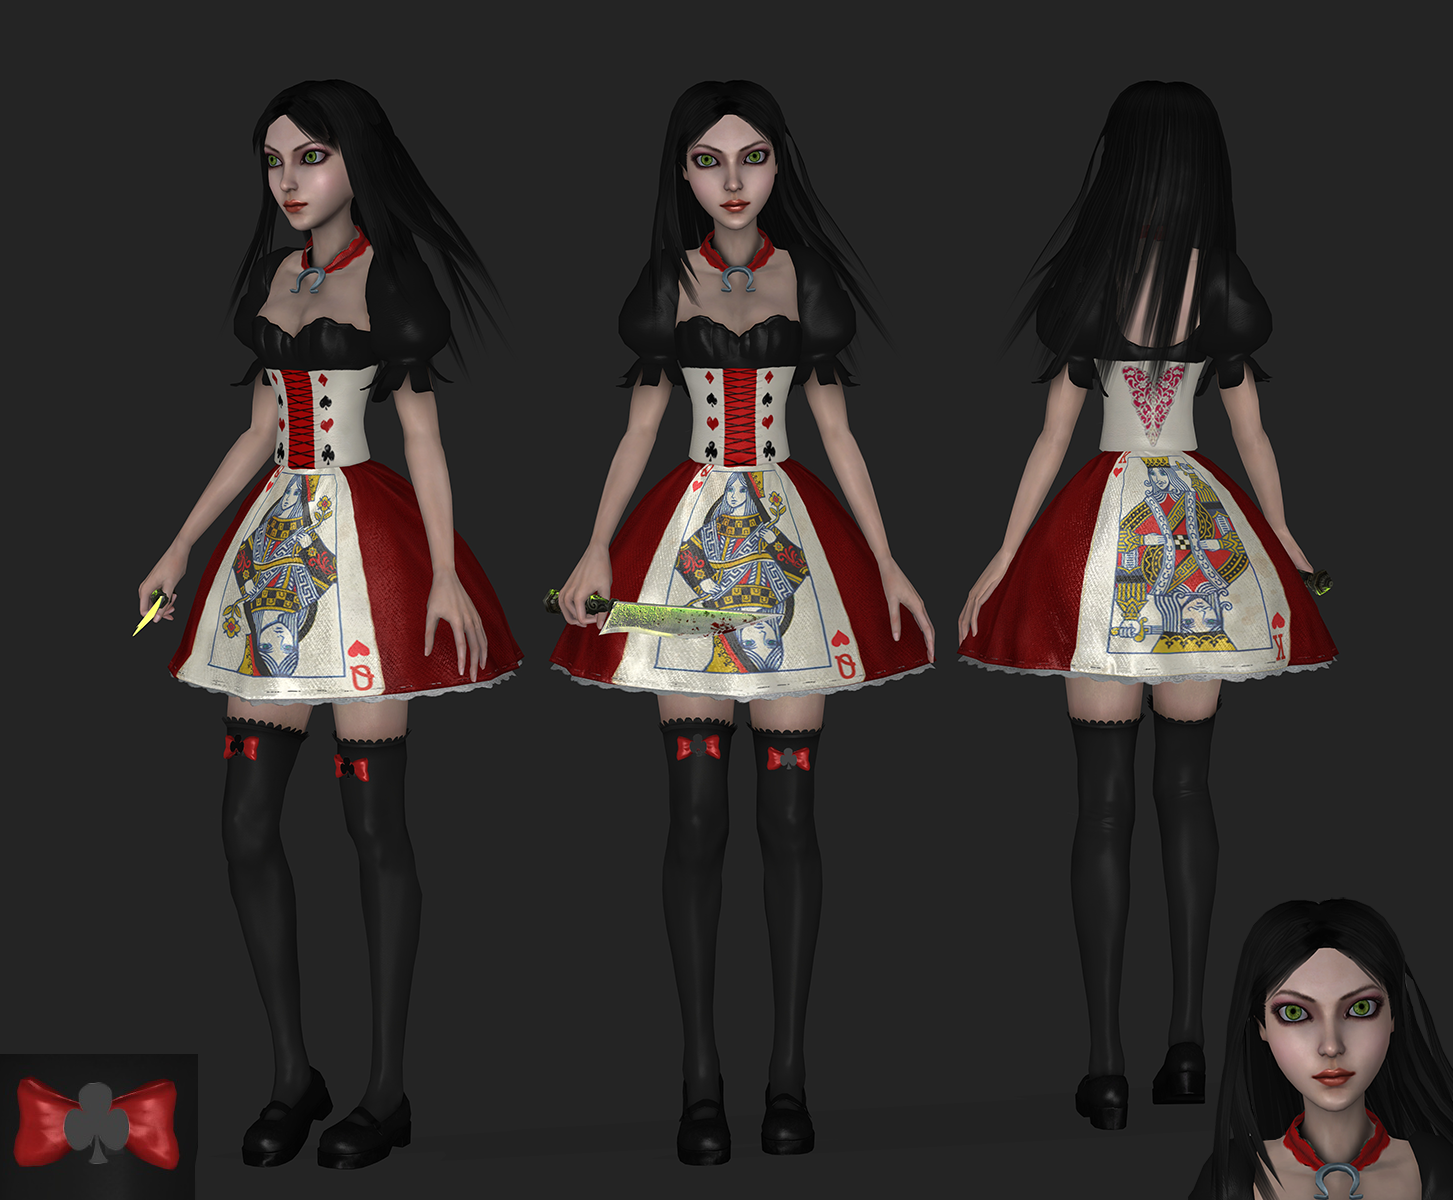 AliceCardDress, wip1 by tombraider4ever on DeviantArt